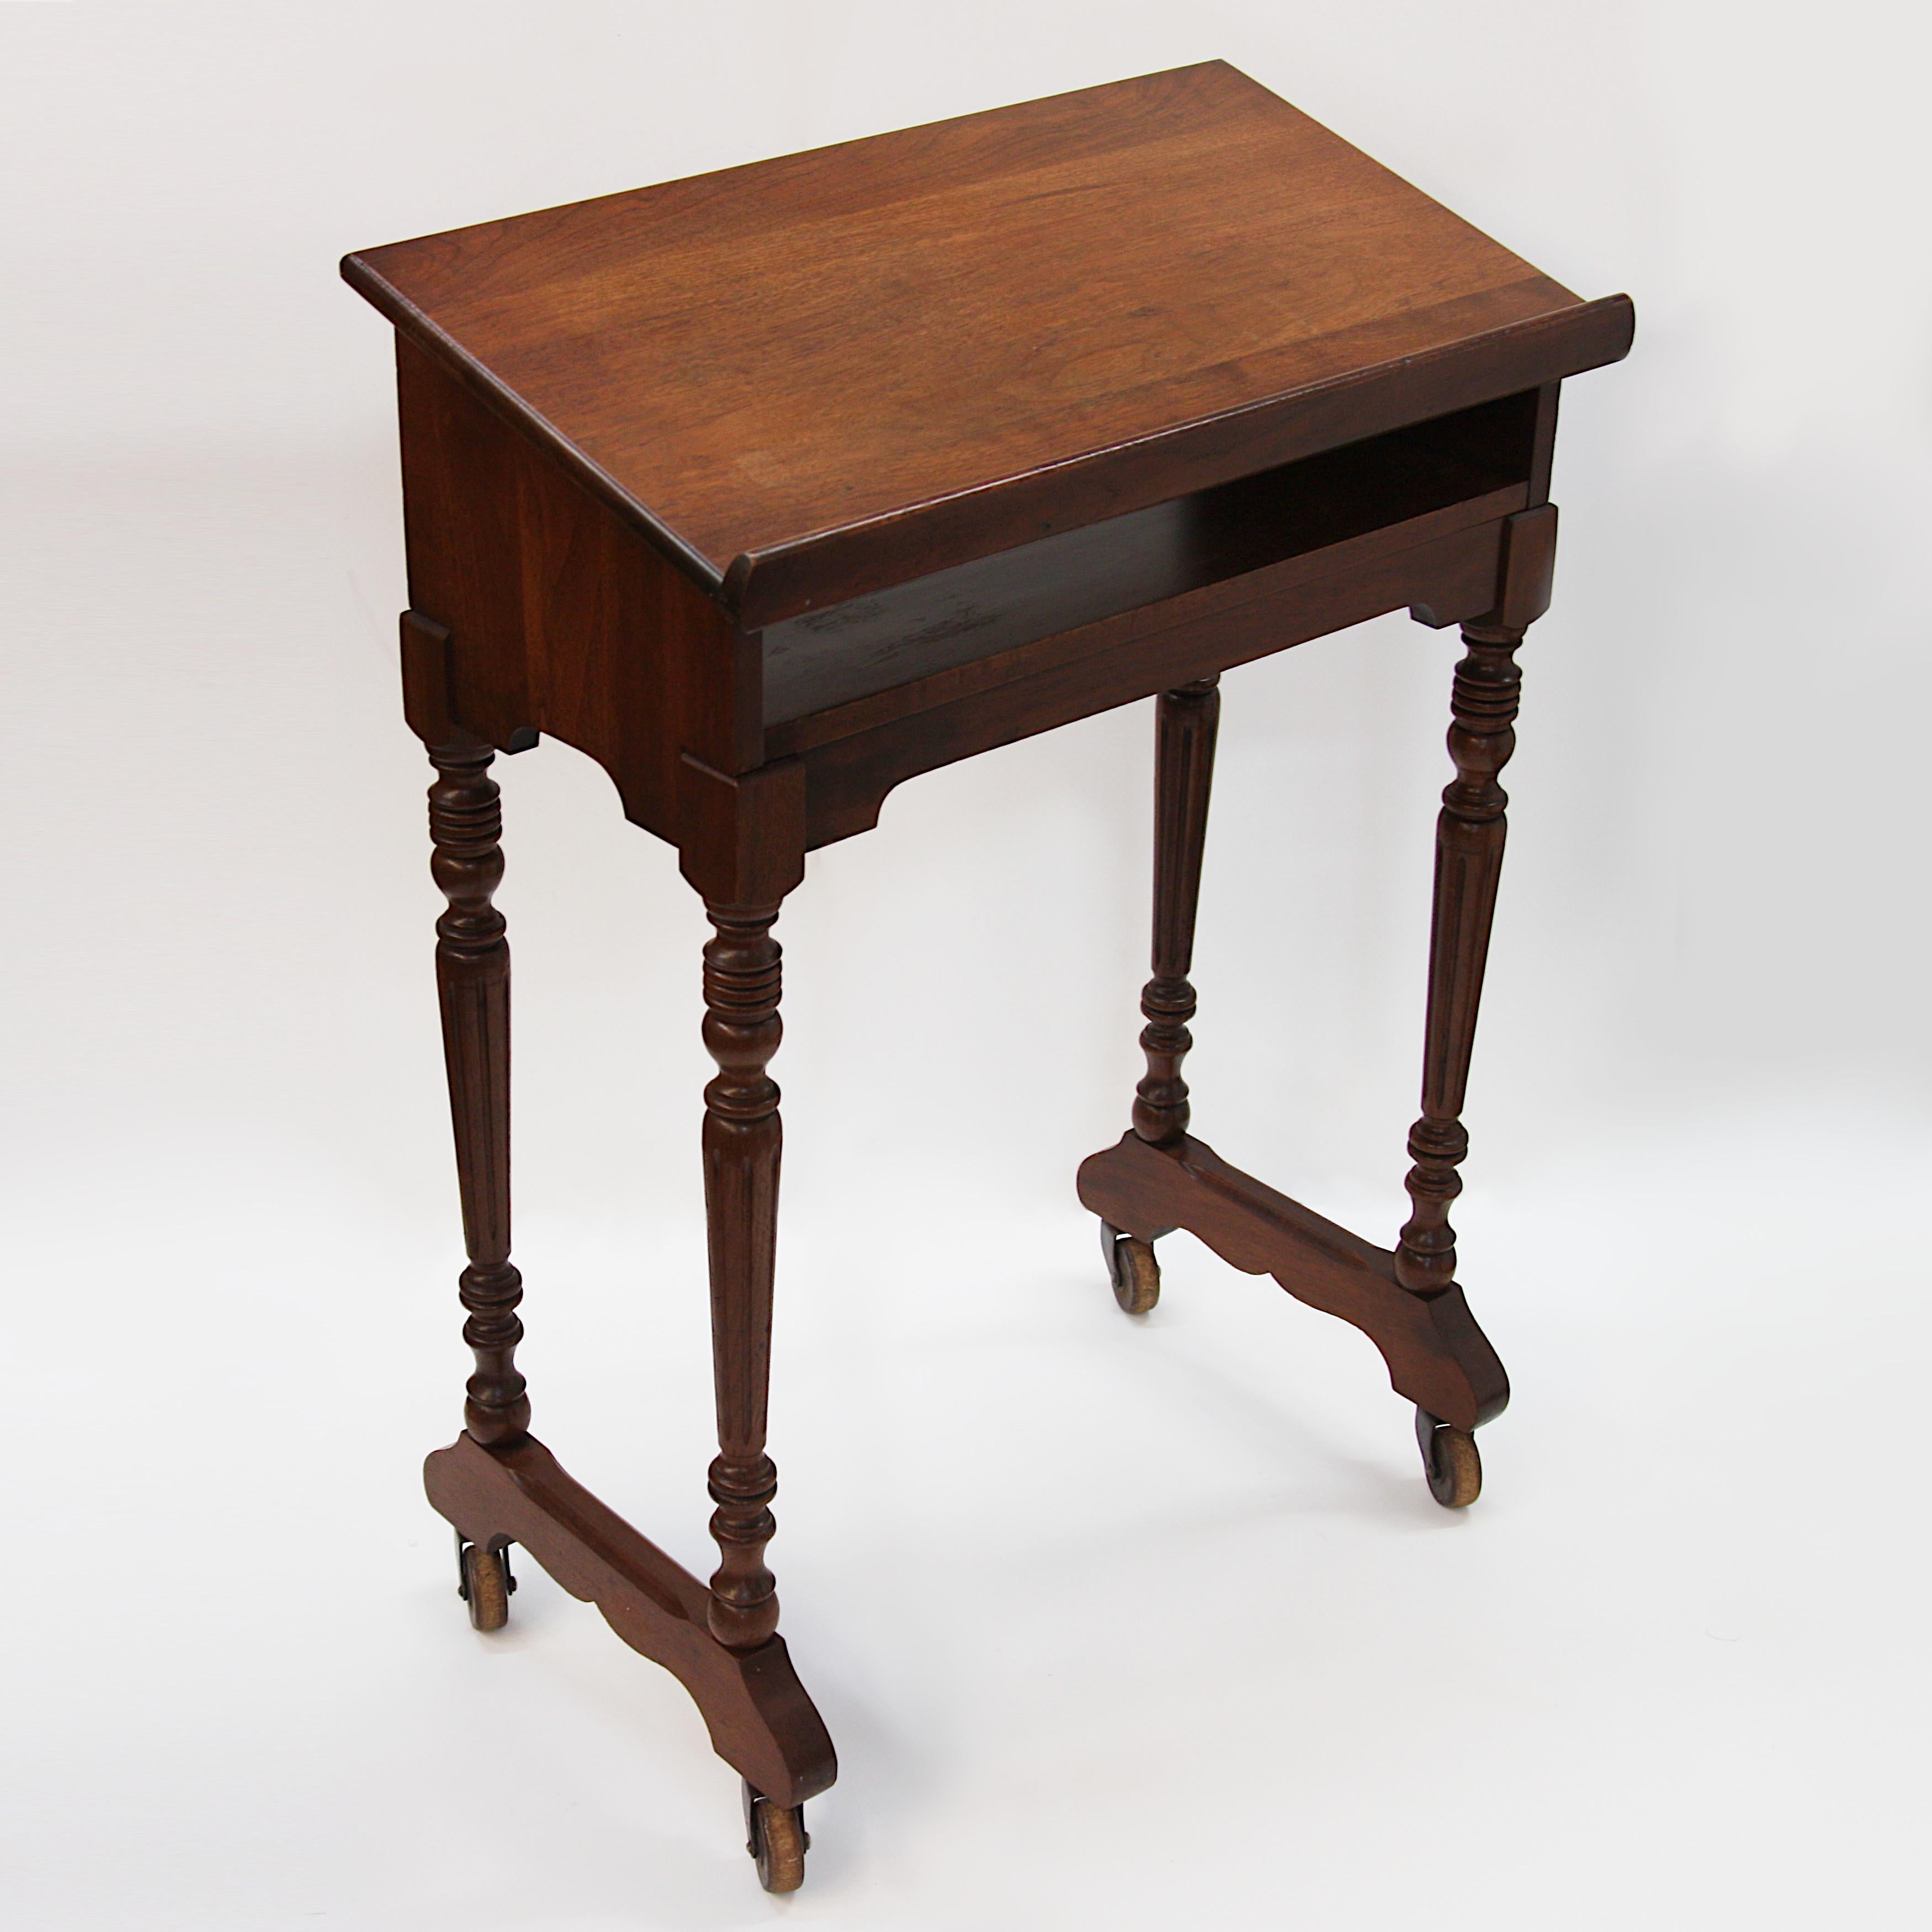 Wonderful Colonial Revival Bible/book stand. Stand features solid walnut construction, turned legs, and wooden wheel casters. An excellent original example and a charming size that could be used almost anywhere!